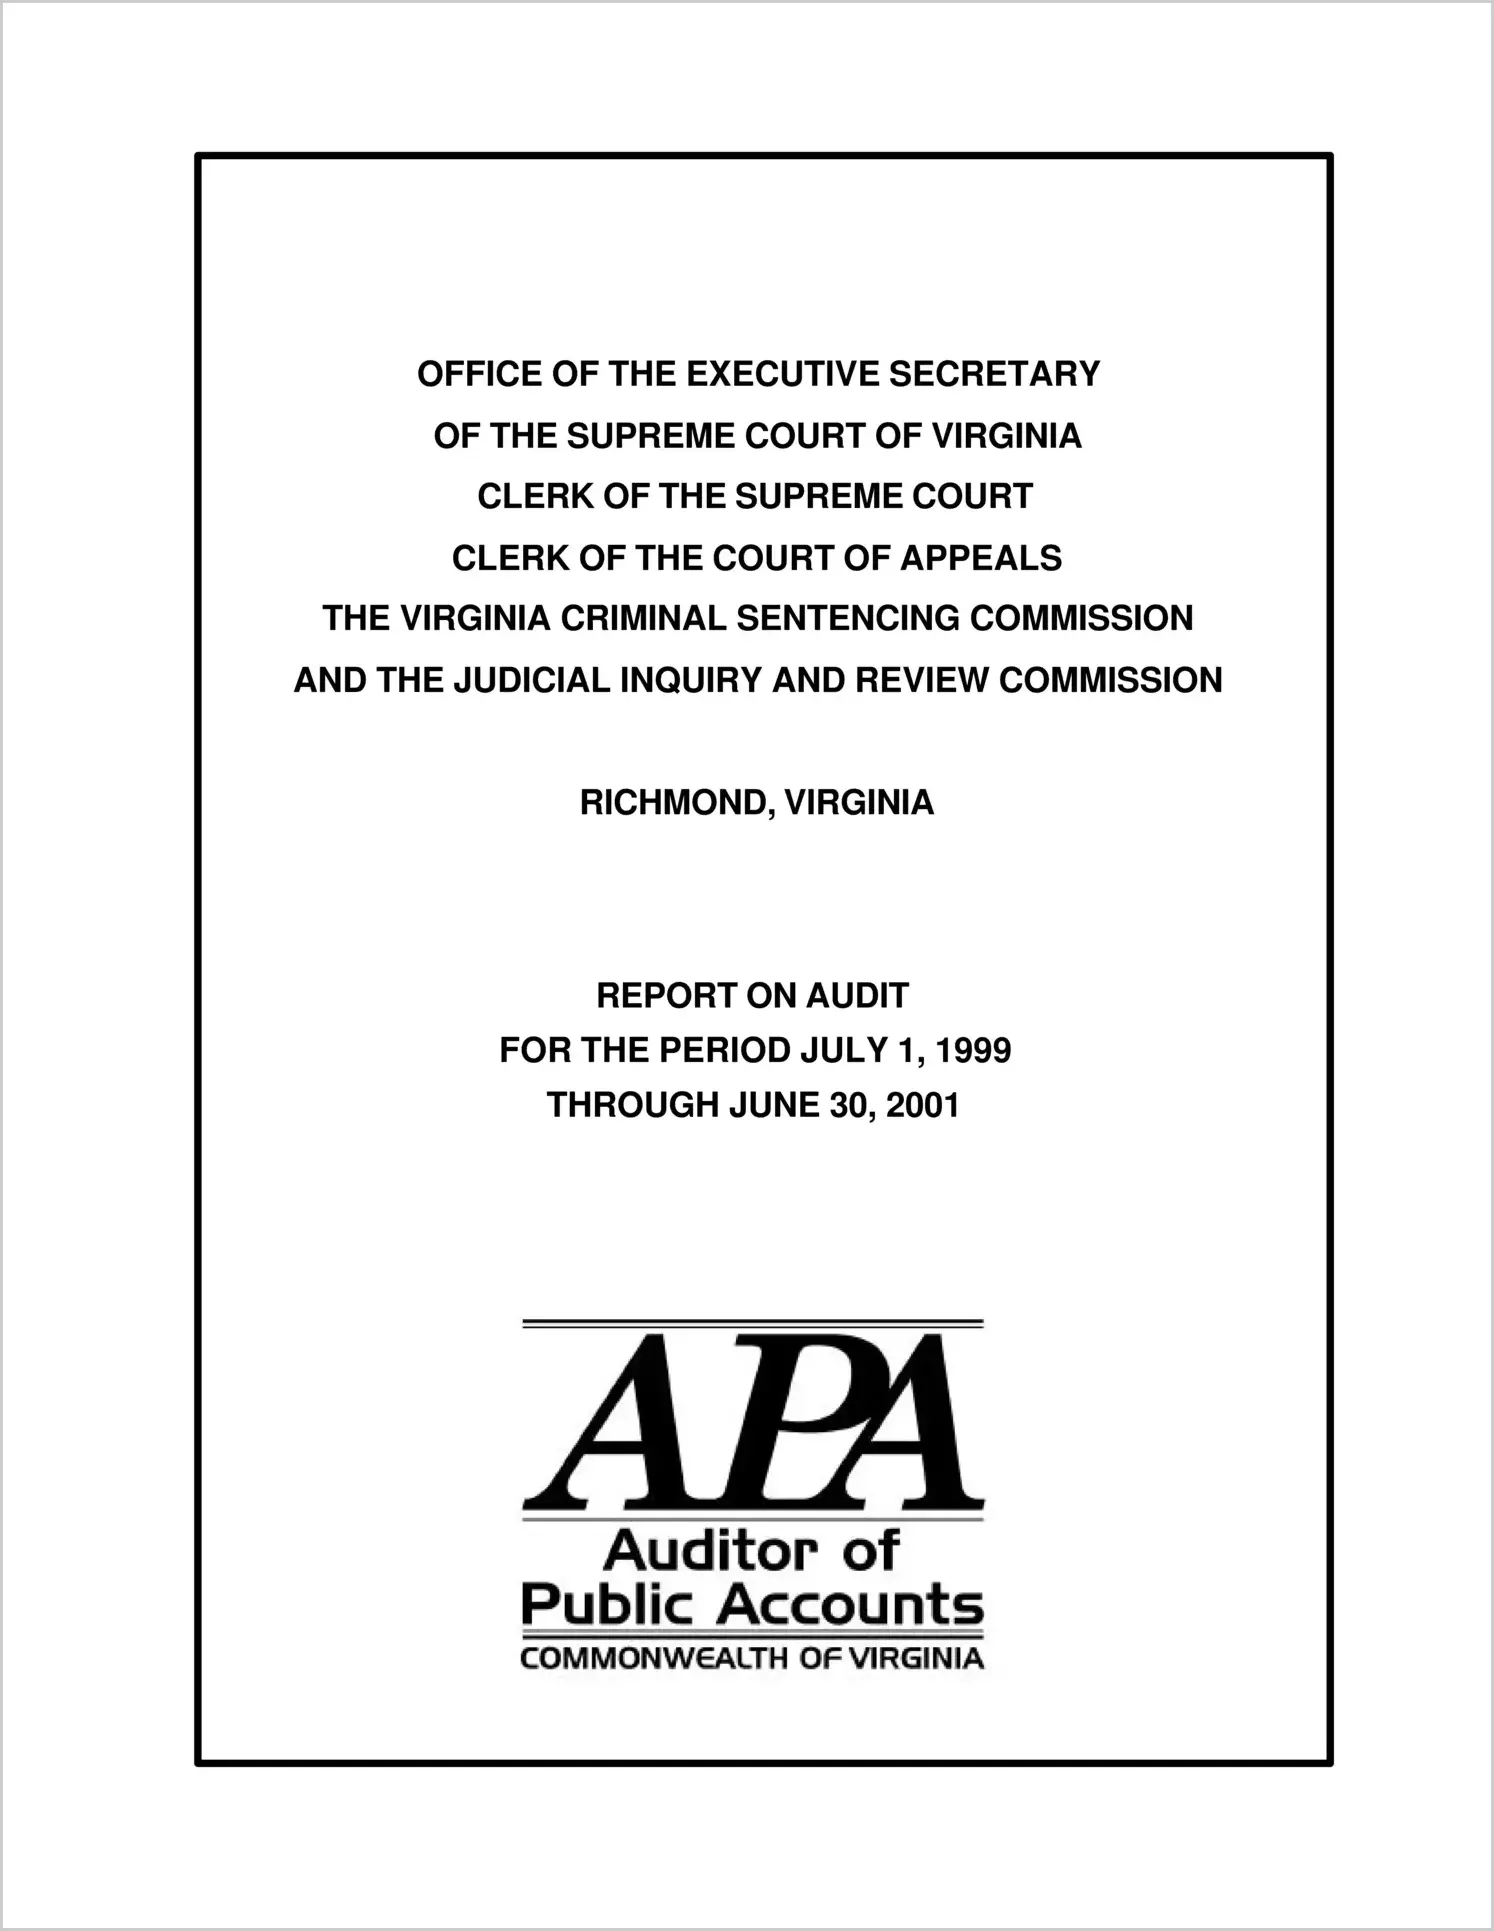 Office of the Executive Secretary of the Supreme Court of Virginia for the period July 1, 1999 through June 30, 2001